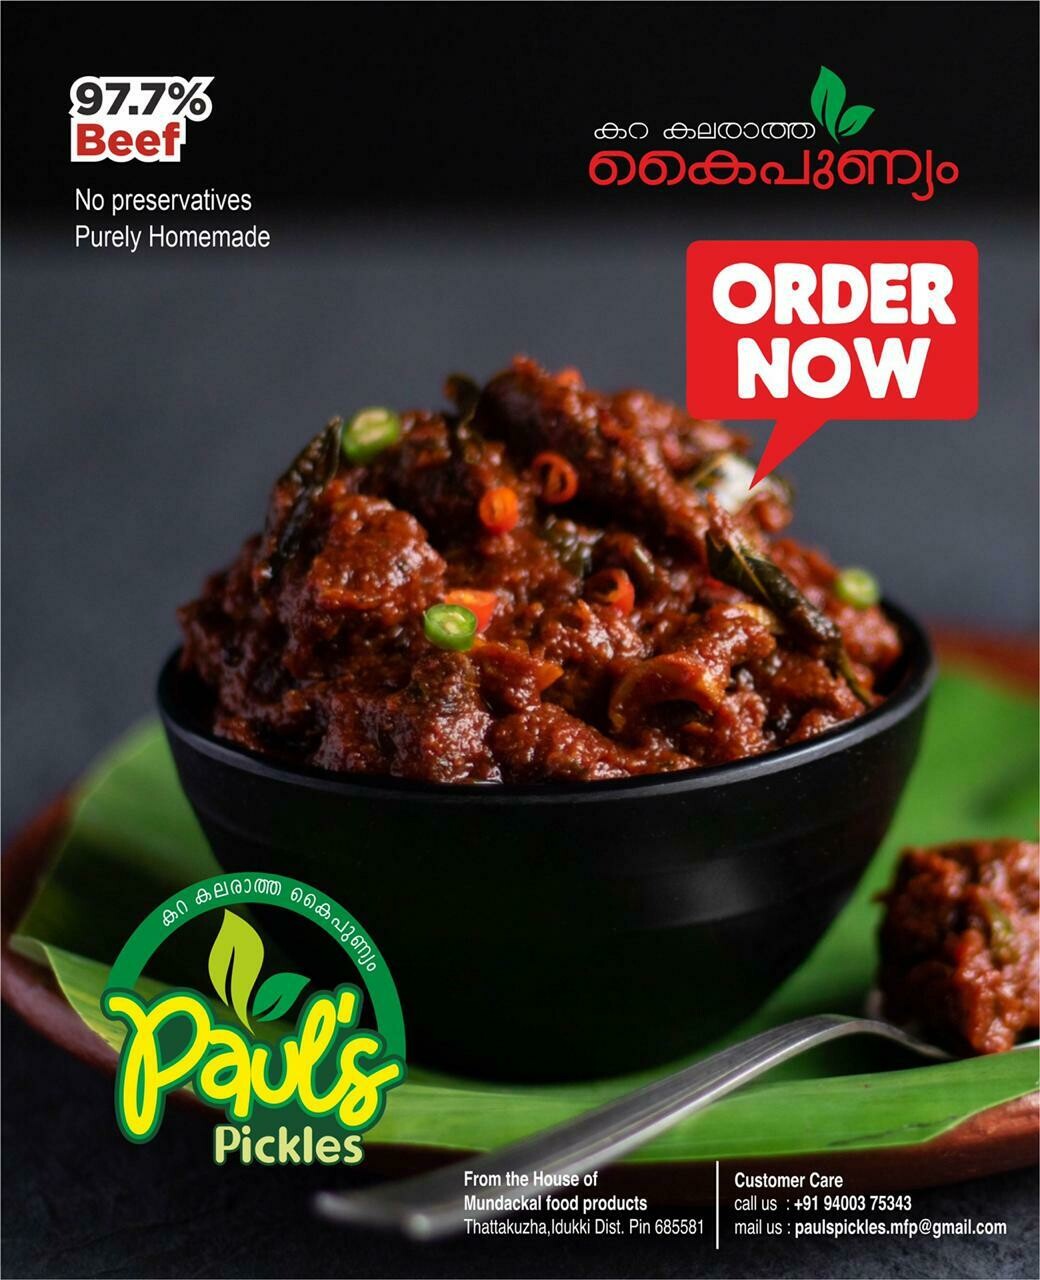 Beef Chilly Pickle 500g MRP ₹ 585 ( ₹95 Off ) 97.7% Beef
-purely homemade
-No added colour
-free shipping